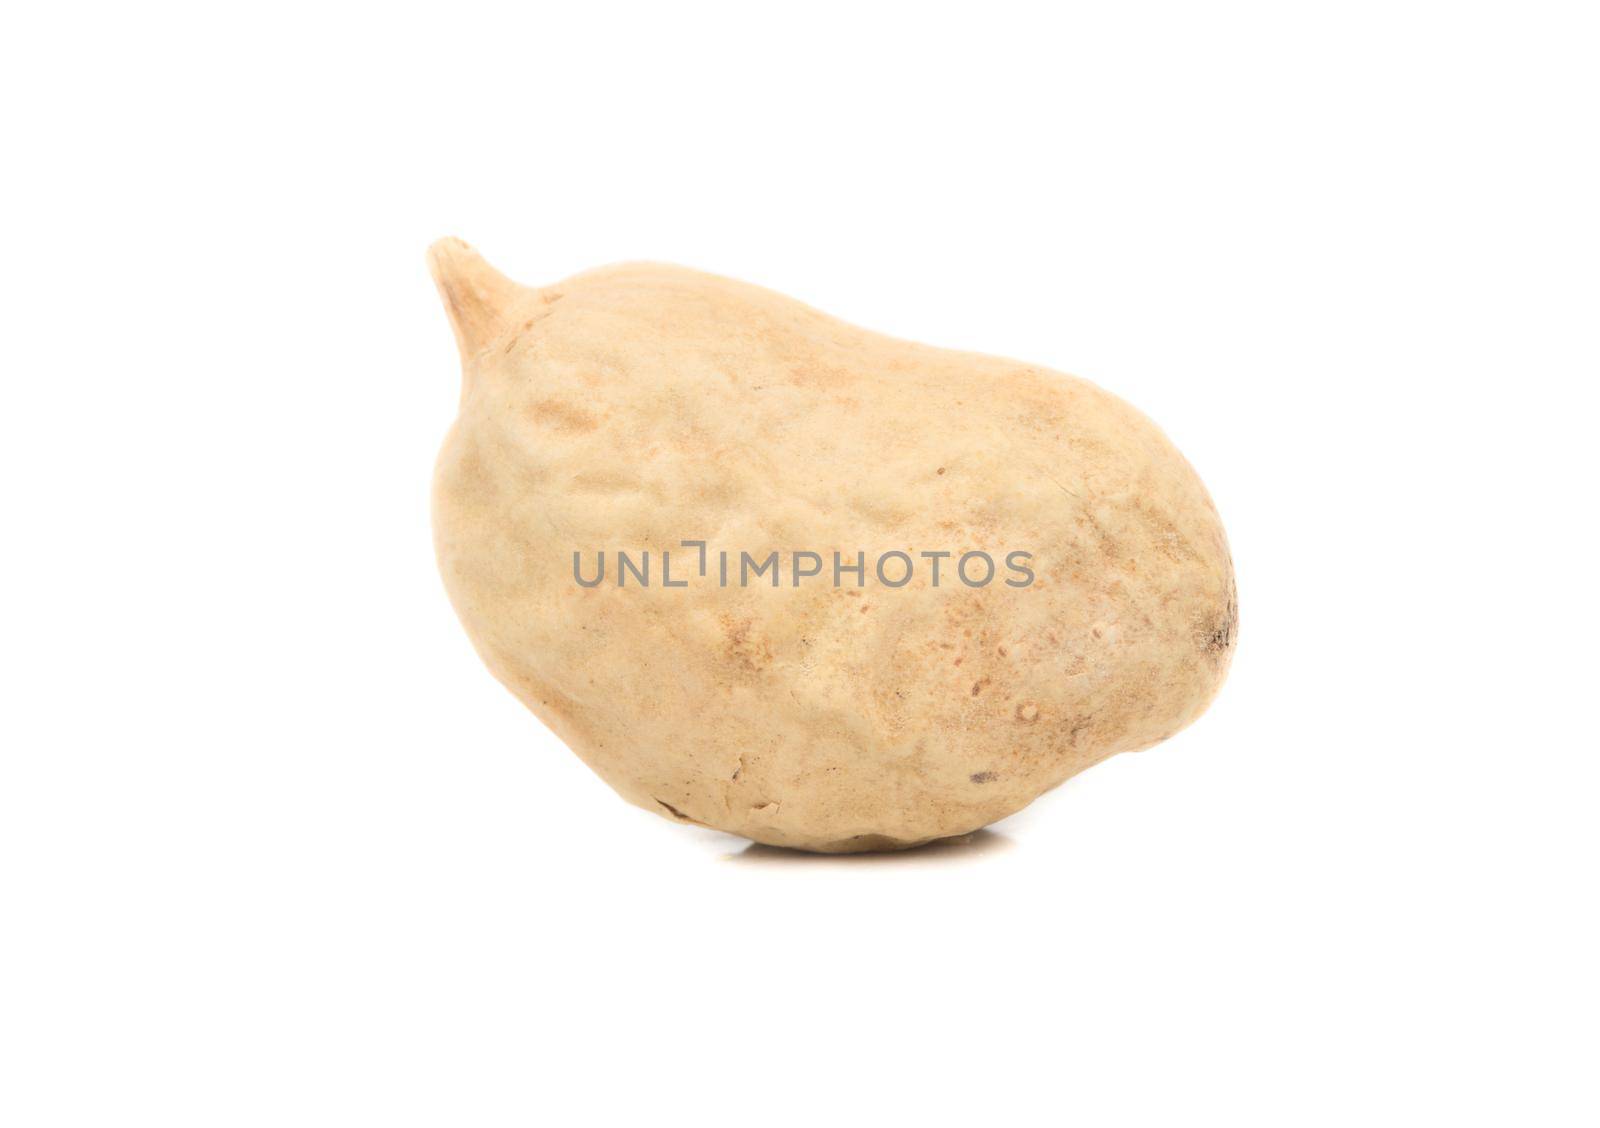 Peanuts in shell one core on a white background